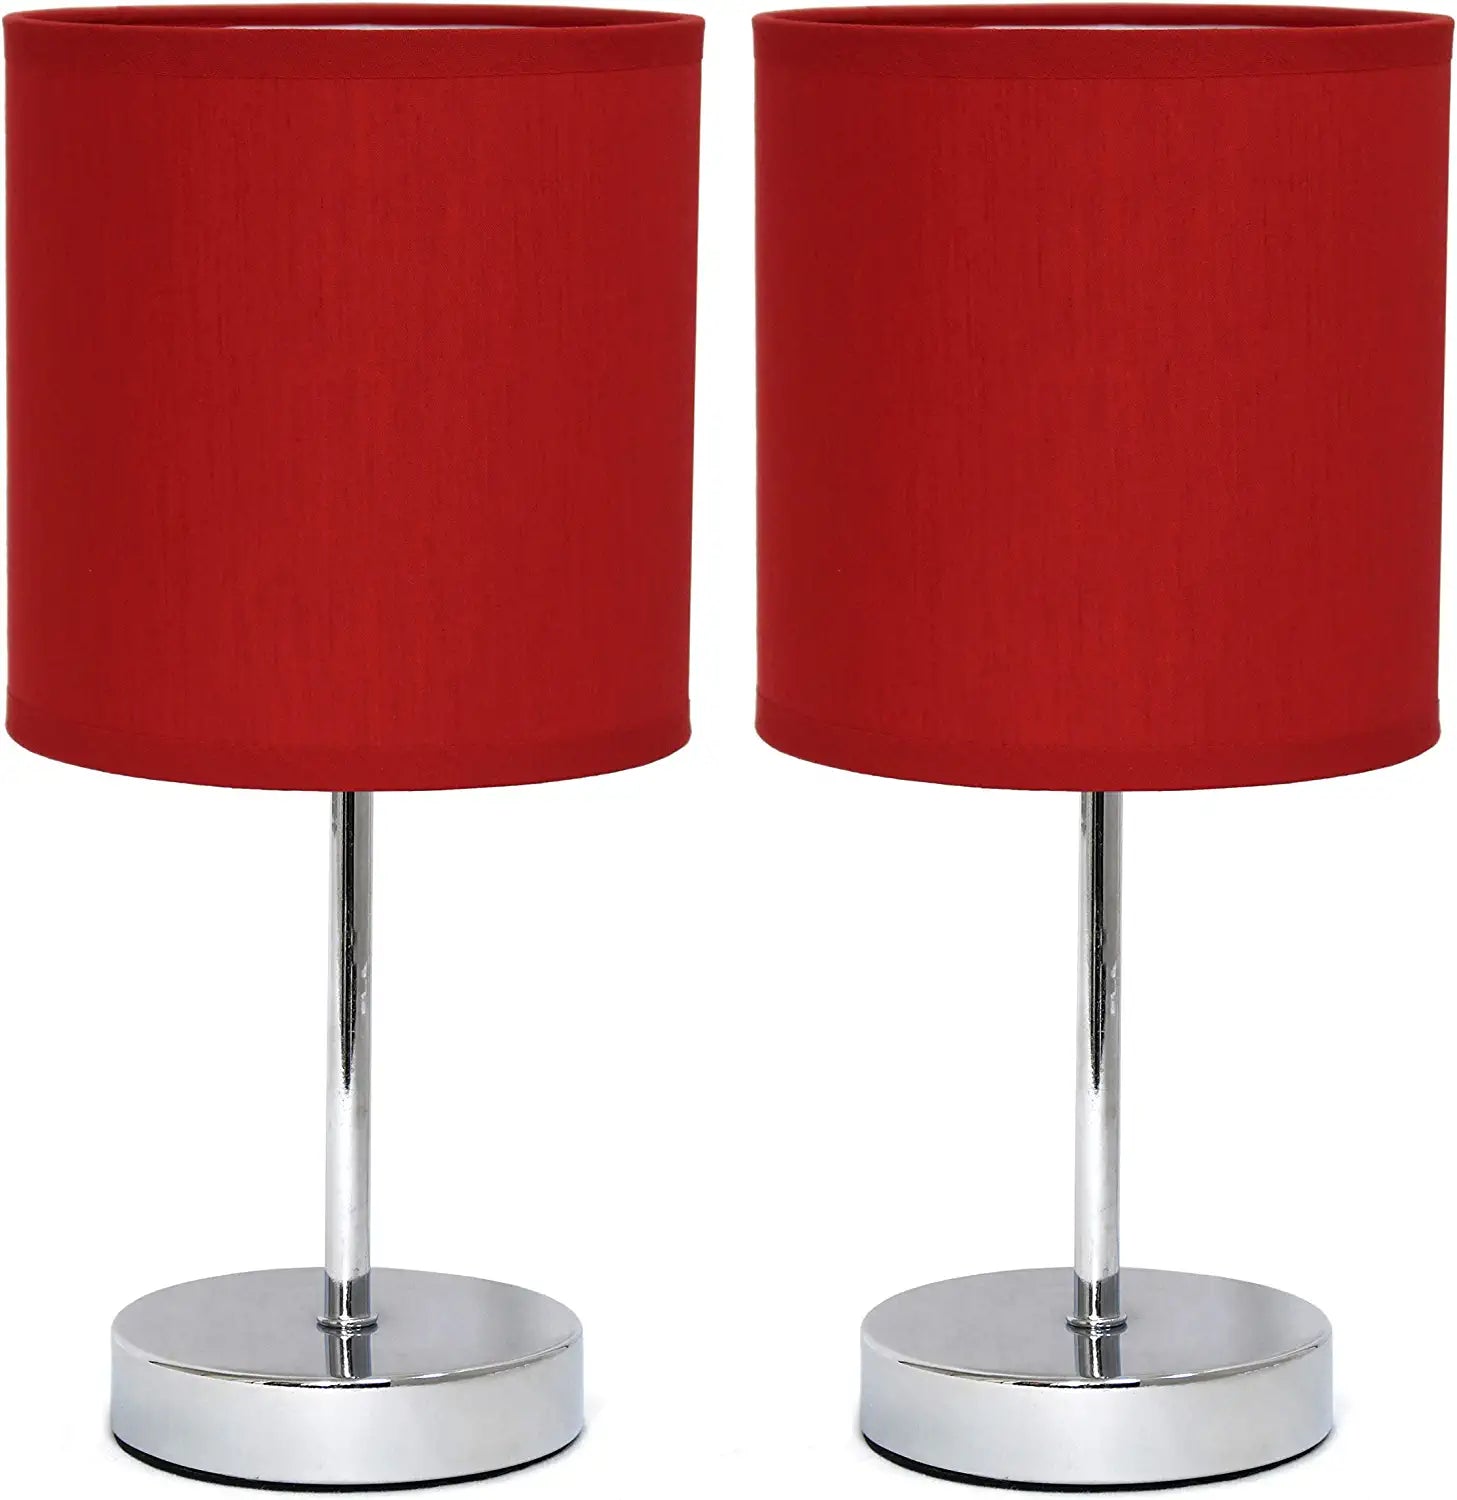 Simple Designs Chrome Mini Basic Table Lamp with Fabric Shade 2 Pack Set, Wine